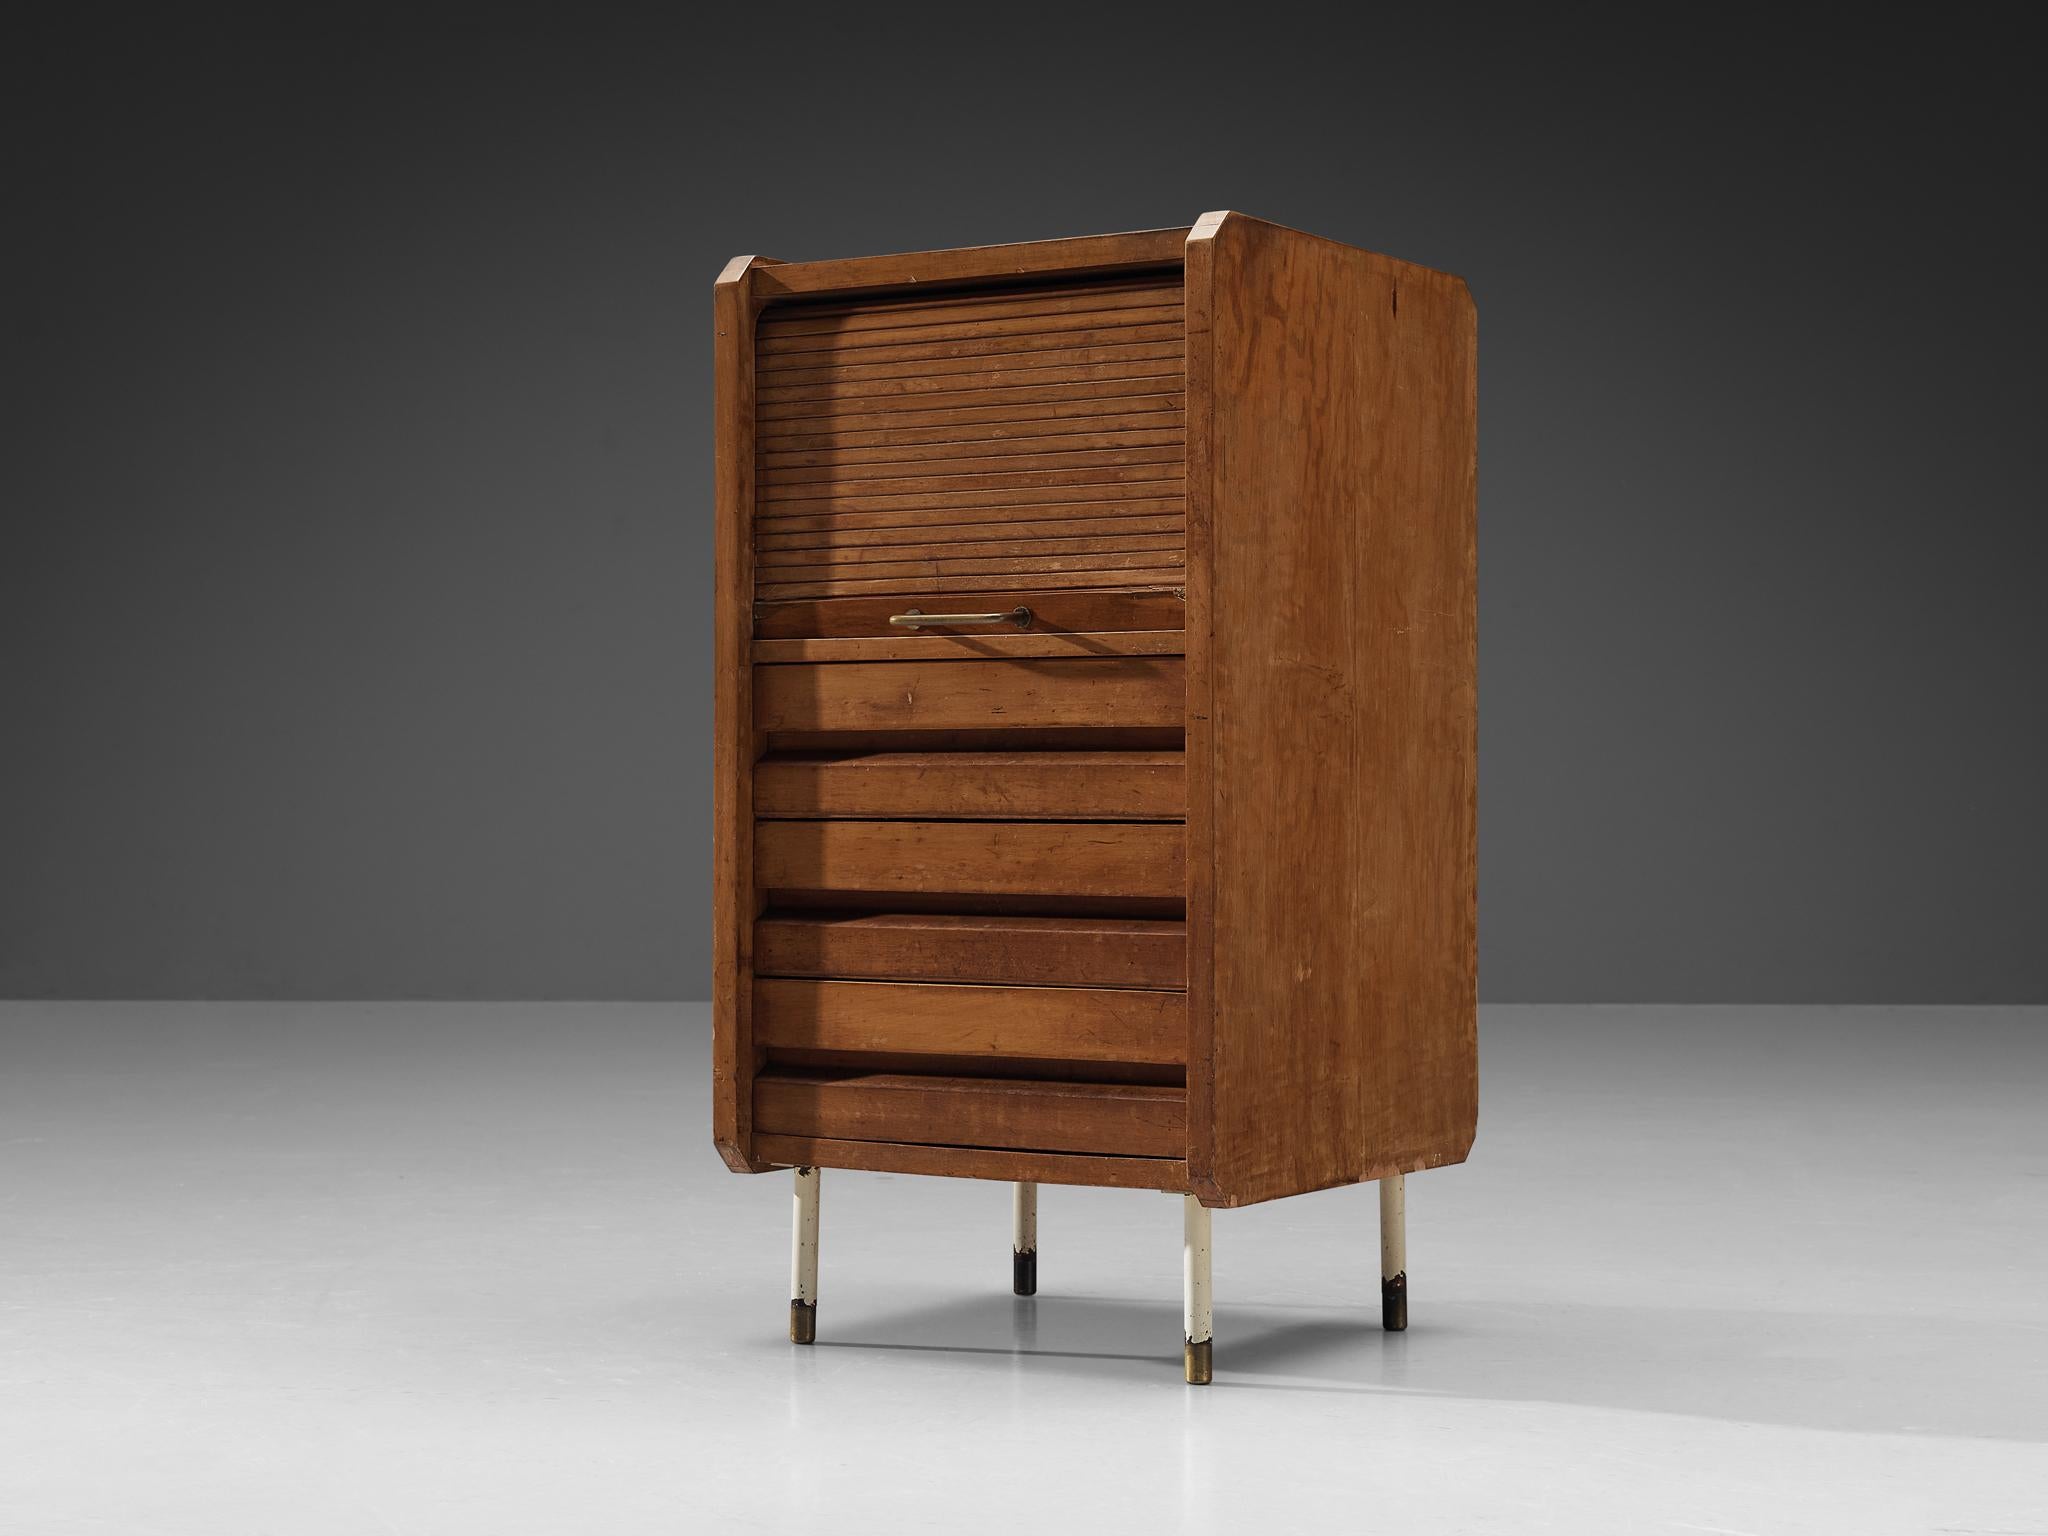 Studio B.B.P.R. (Lodovico Barbiano di Belgiojoso, Enrico Peressutti, Ernesto Nathan Rogers), cabinet, walnut, brass, lacquered metal, Italy, 1960s.  

This delicate small cabinet is designed by Studio B.B.P.R. in the 1960s. Furnished with seven